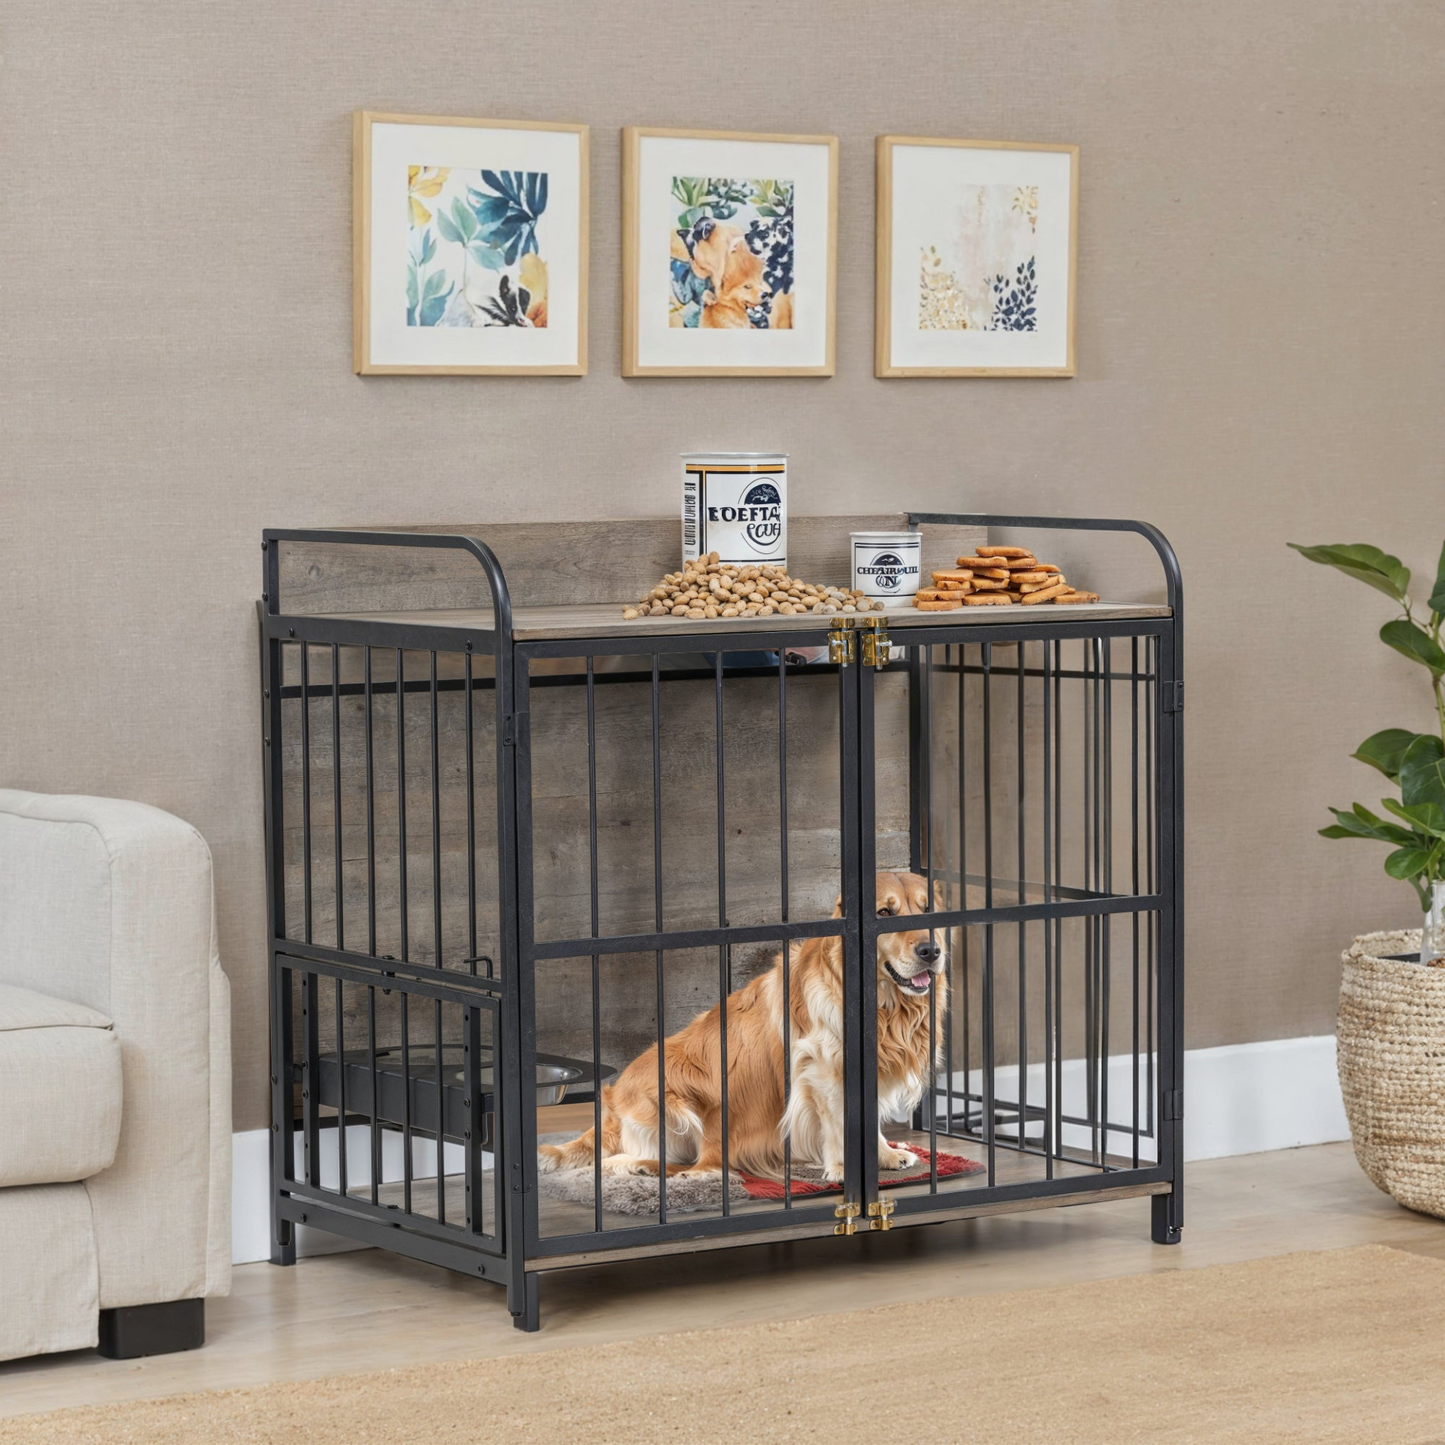 39'' Indoor Metal Dog Crate with Double Doors, Wooden Side End Table Crate, Dog Crate Furniture with Adjustable Feeder Stand, for Medium Dog, Gray